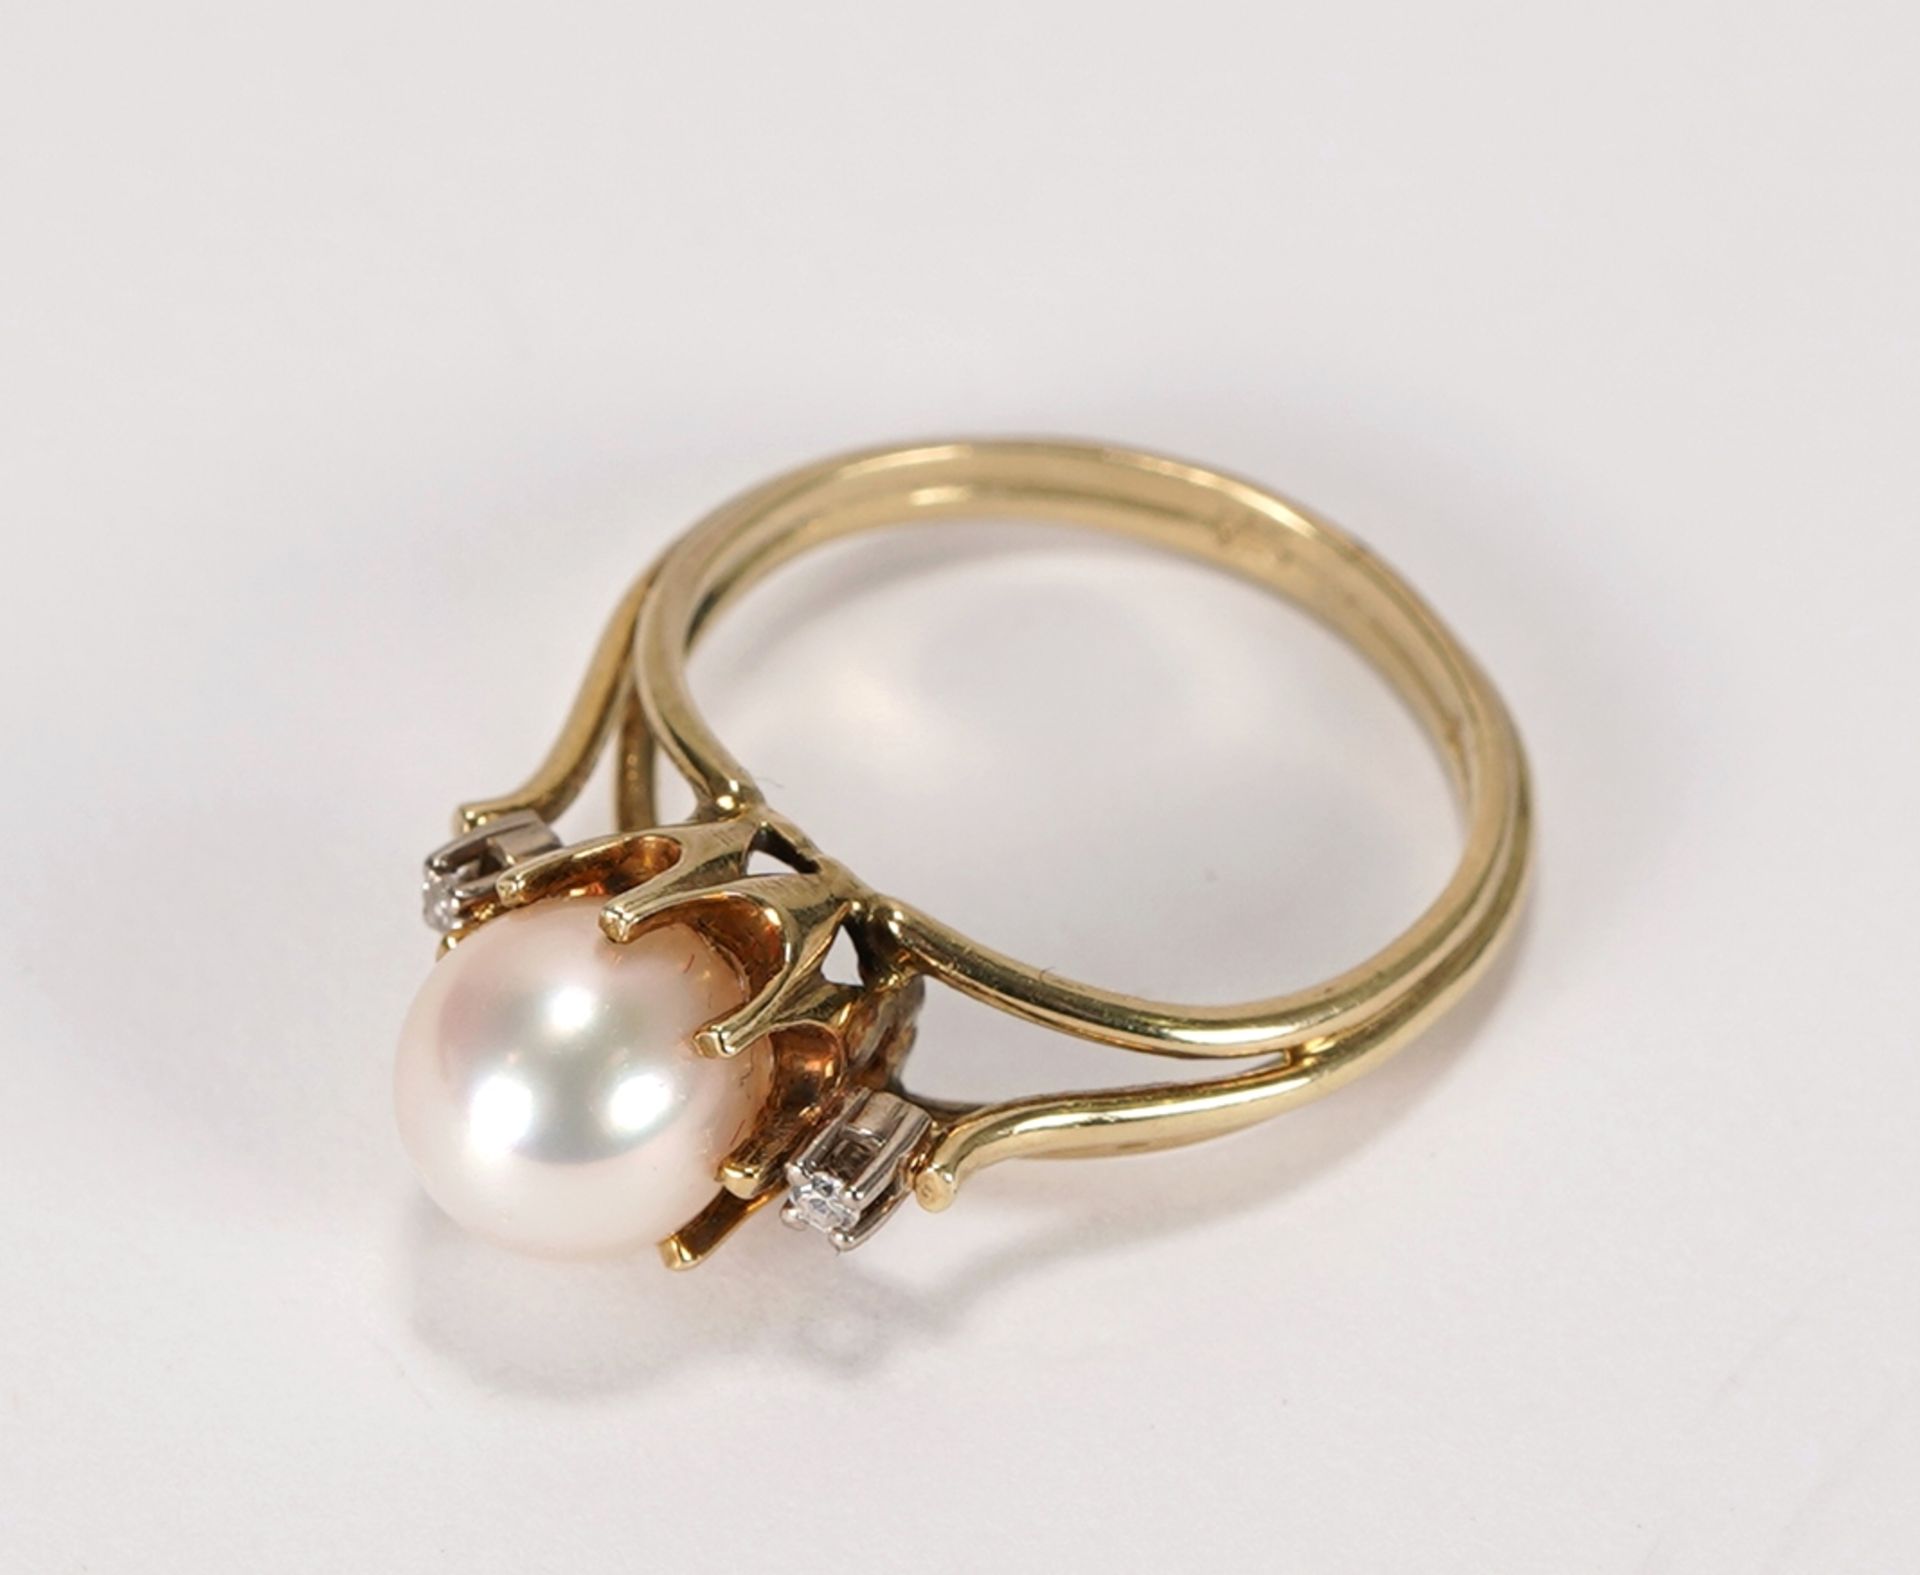 Pearl ring - Image 2 of 2